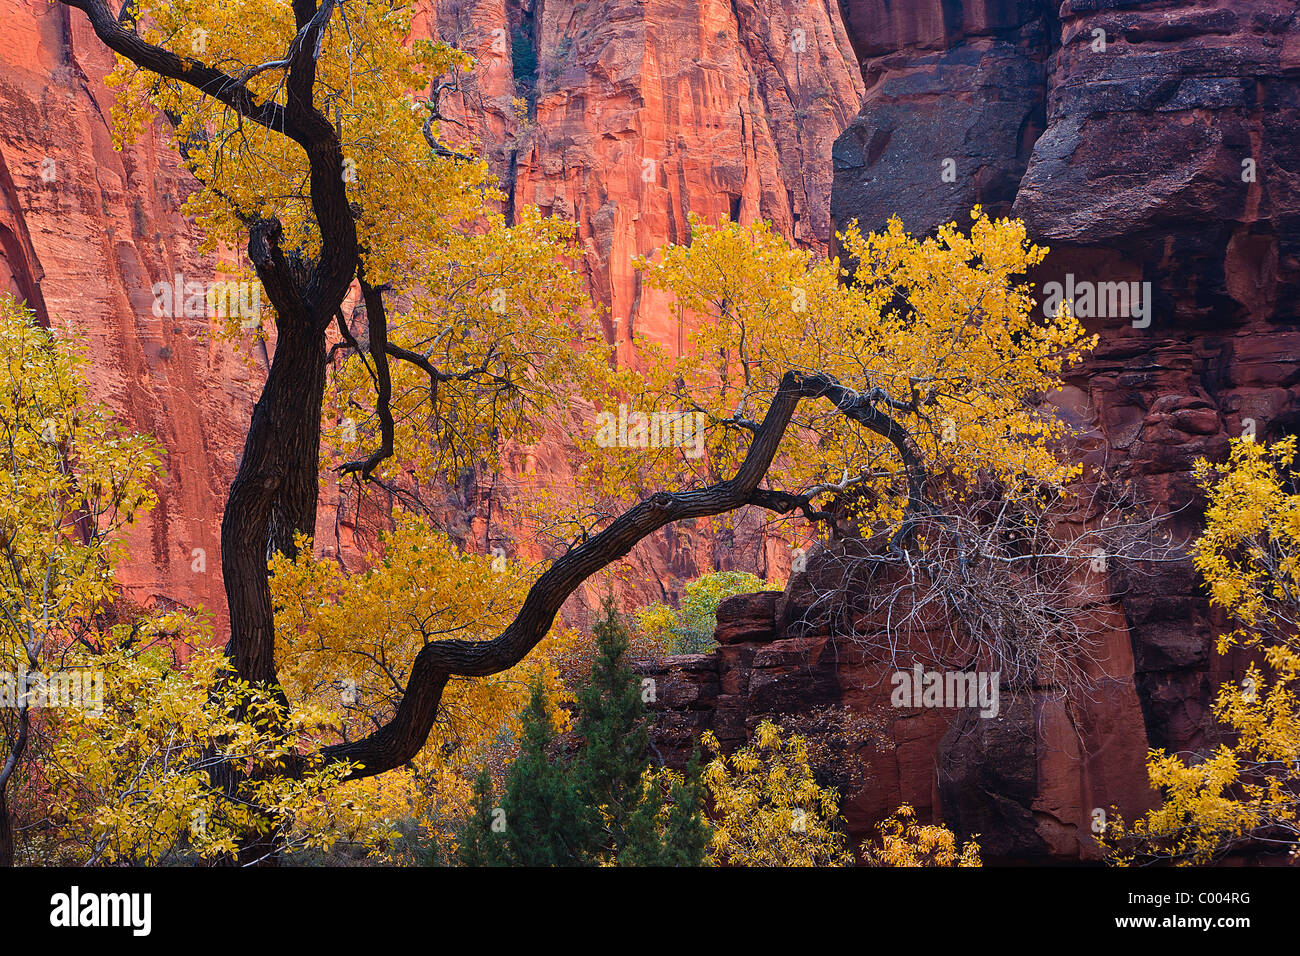 Cottonwood tree in peak fall color, Zion Canyon, Zion National Park, Utah, USA. Stock Photo